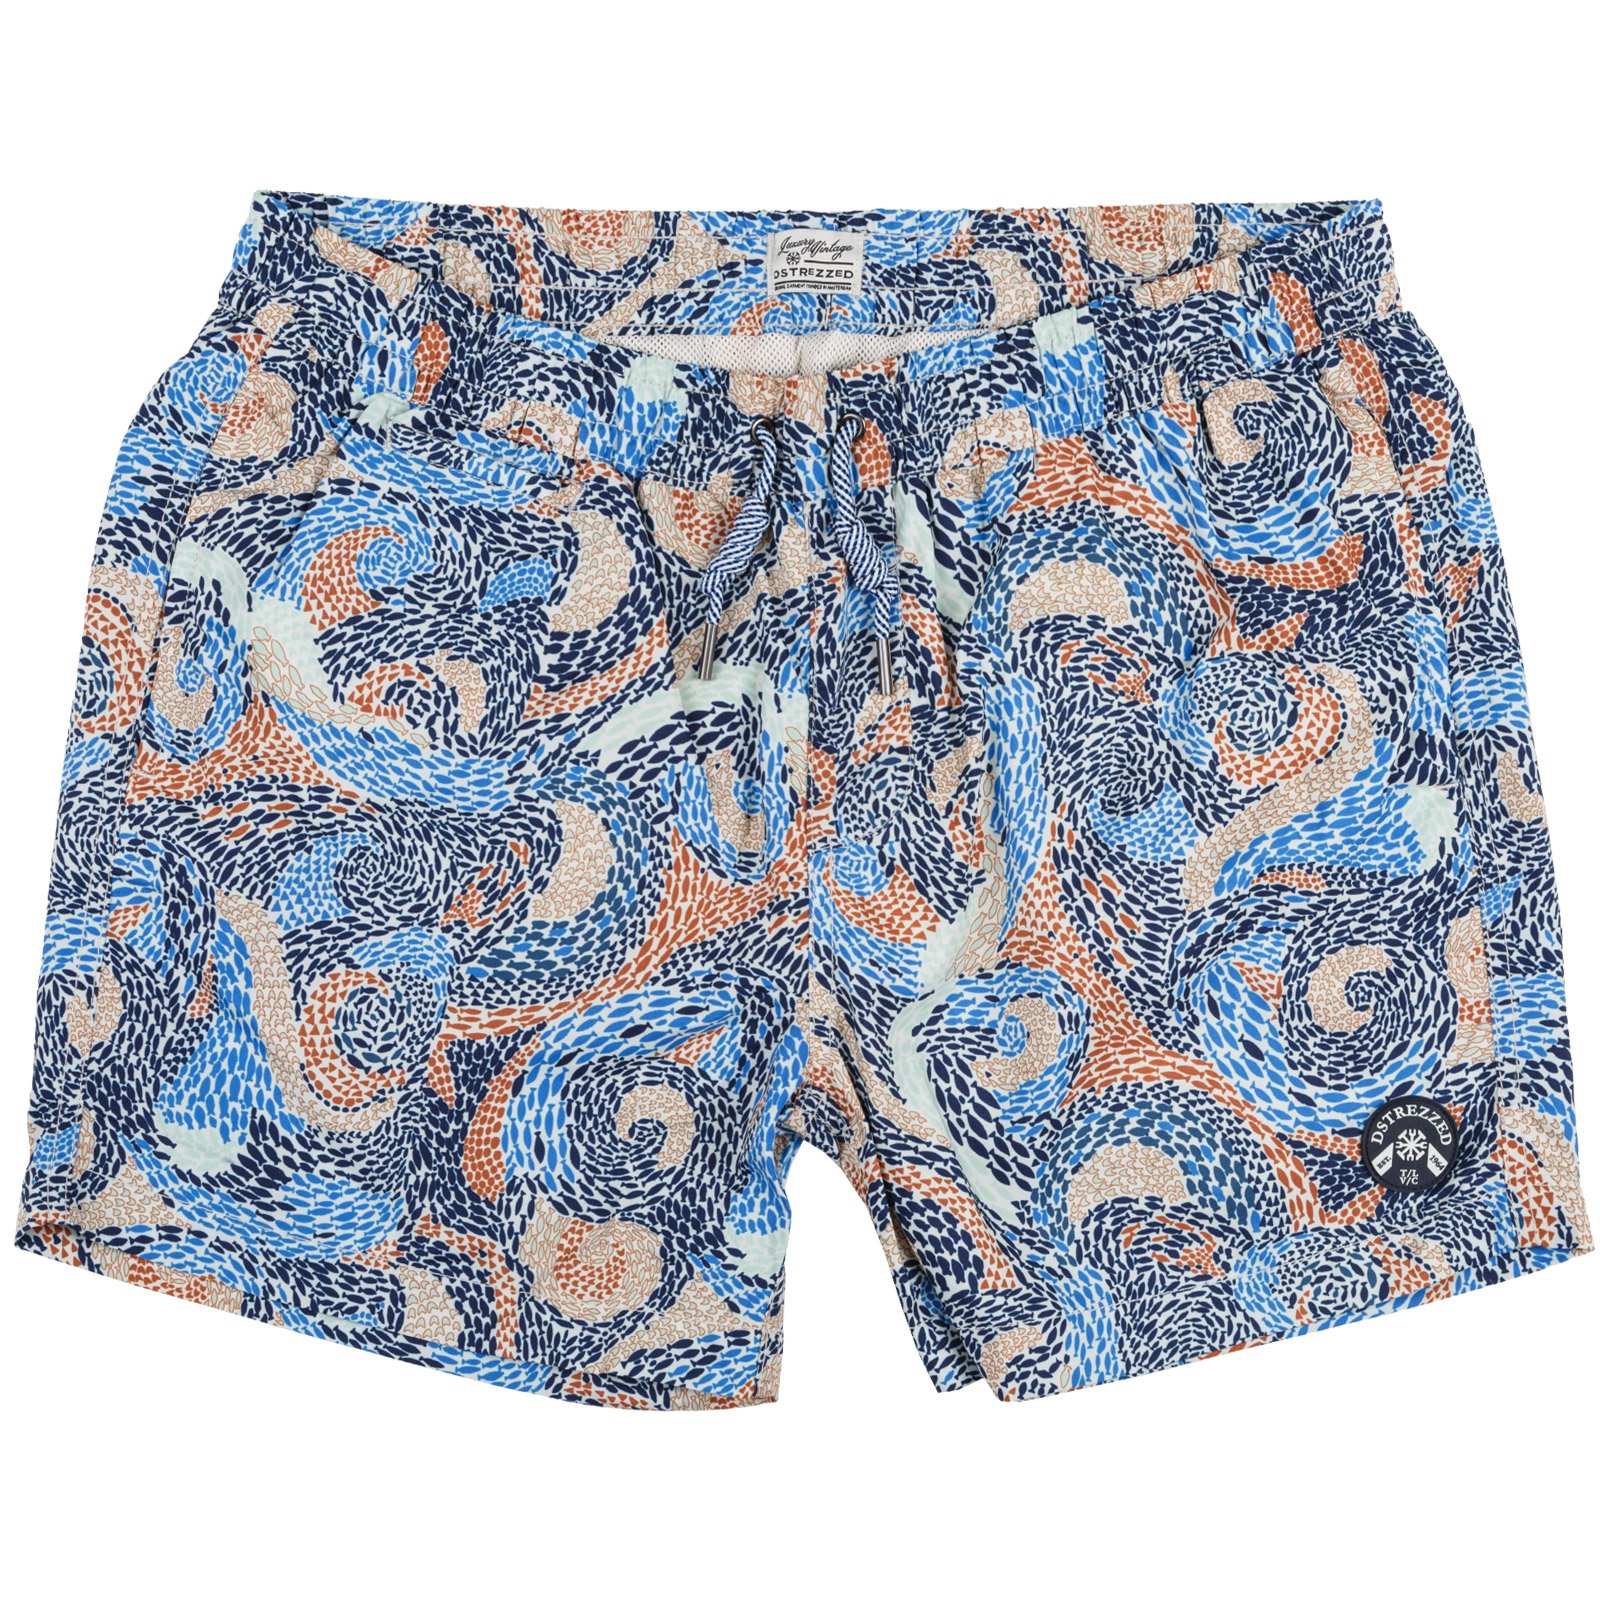 Fish Print Swim Shorts - Gifts : FA2 Online Outlet Store - DSTREZZED 2018SS